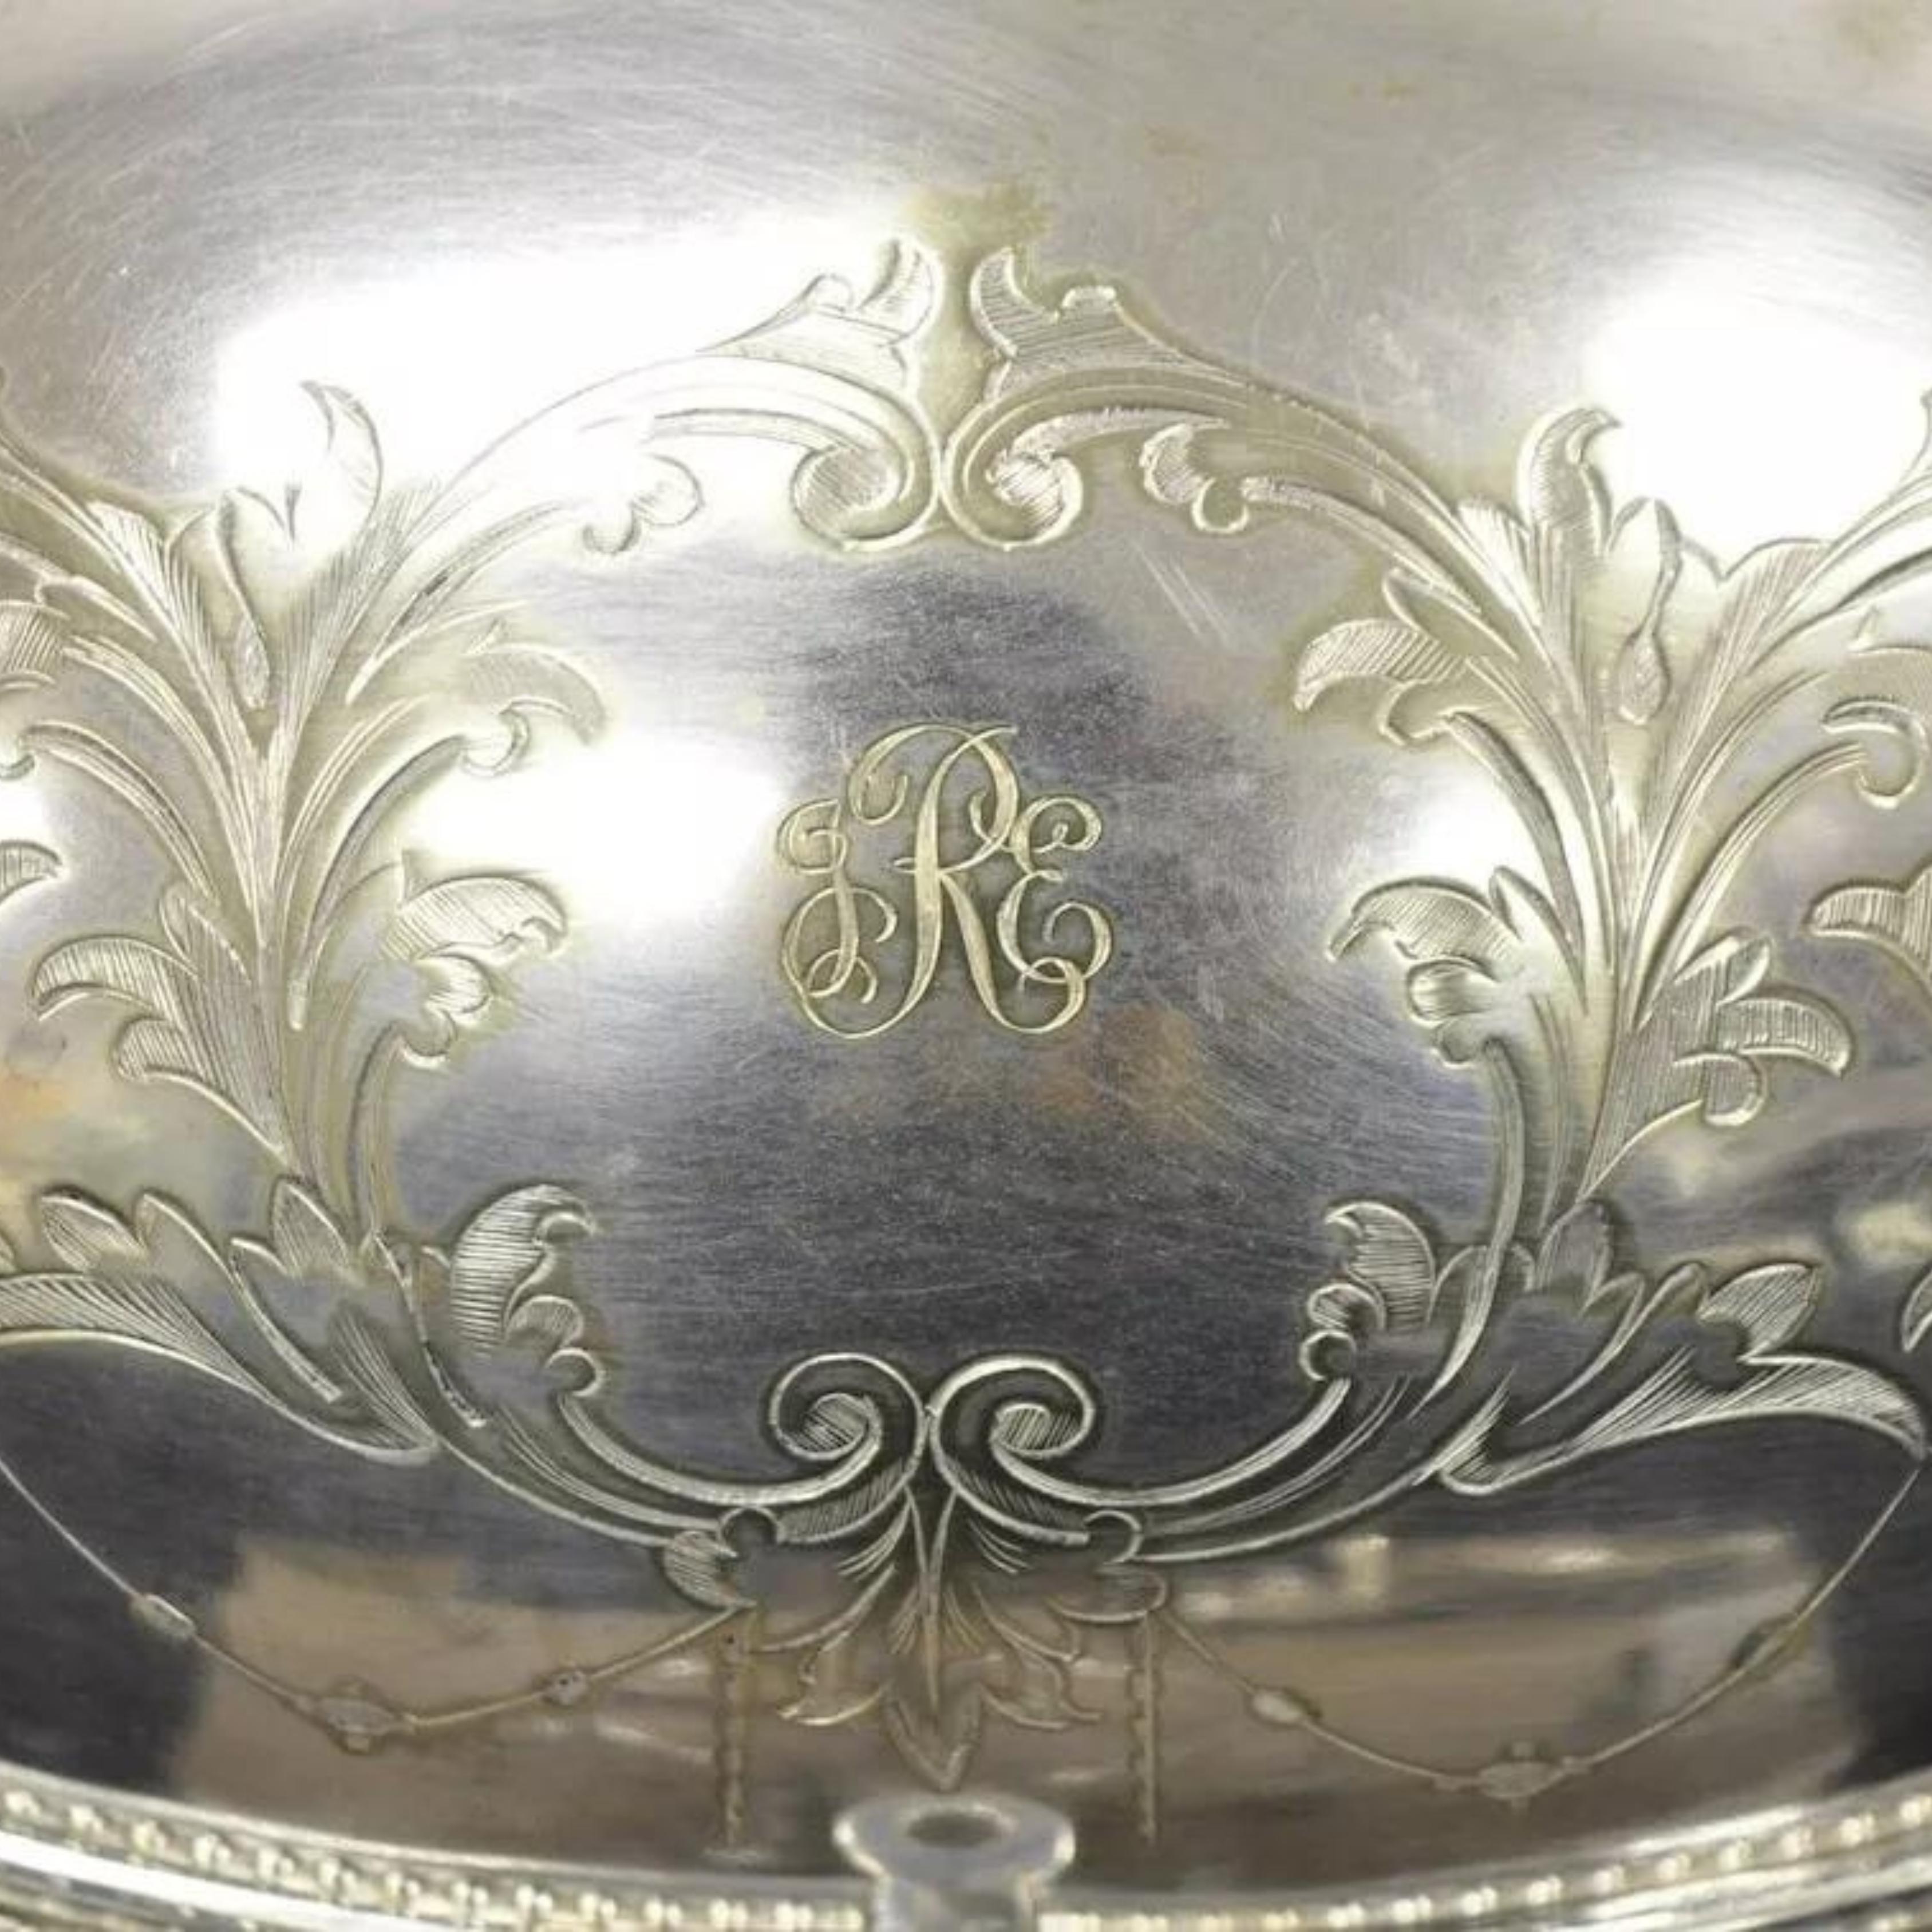 Antique Edwardian Silver Plated Revolving Dome Oval Chafing Dish Food Warmer In Good Condition For Sale In Philadelphia, PA